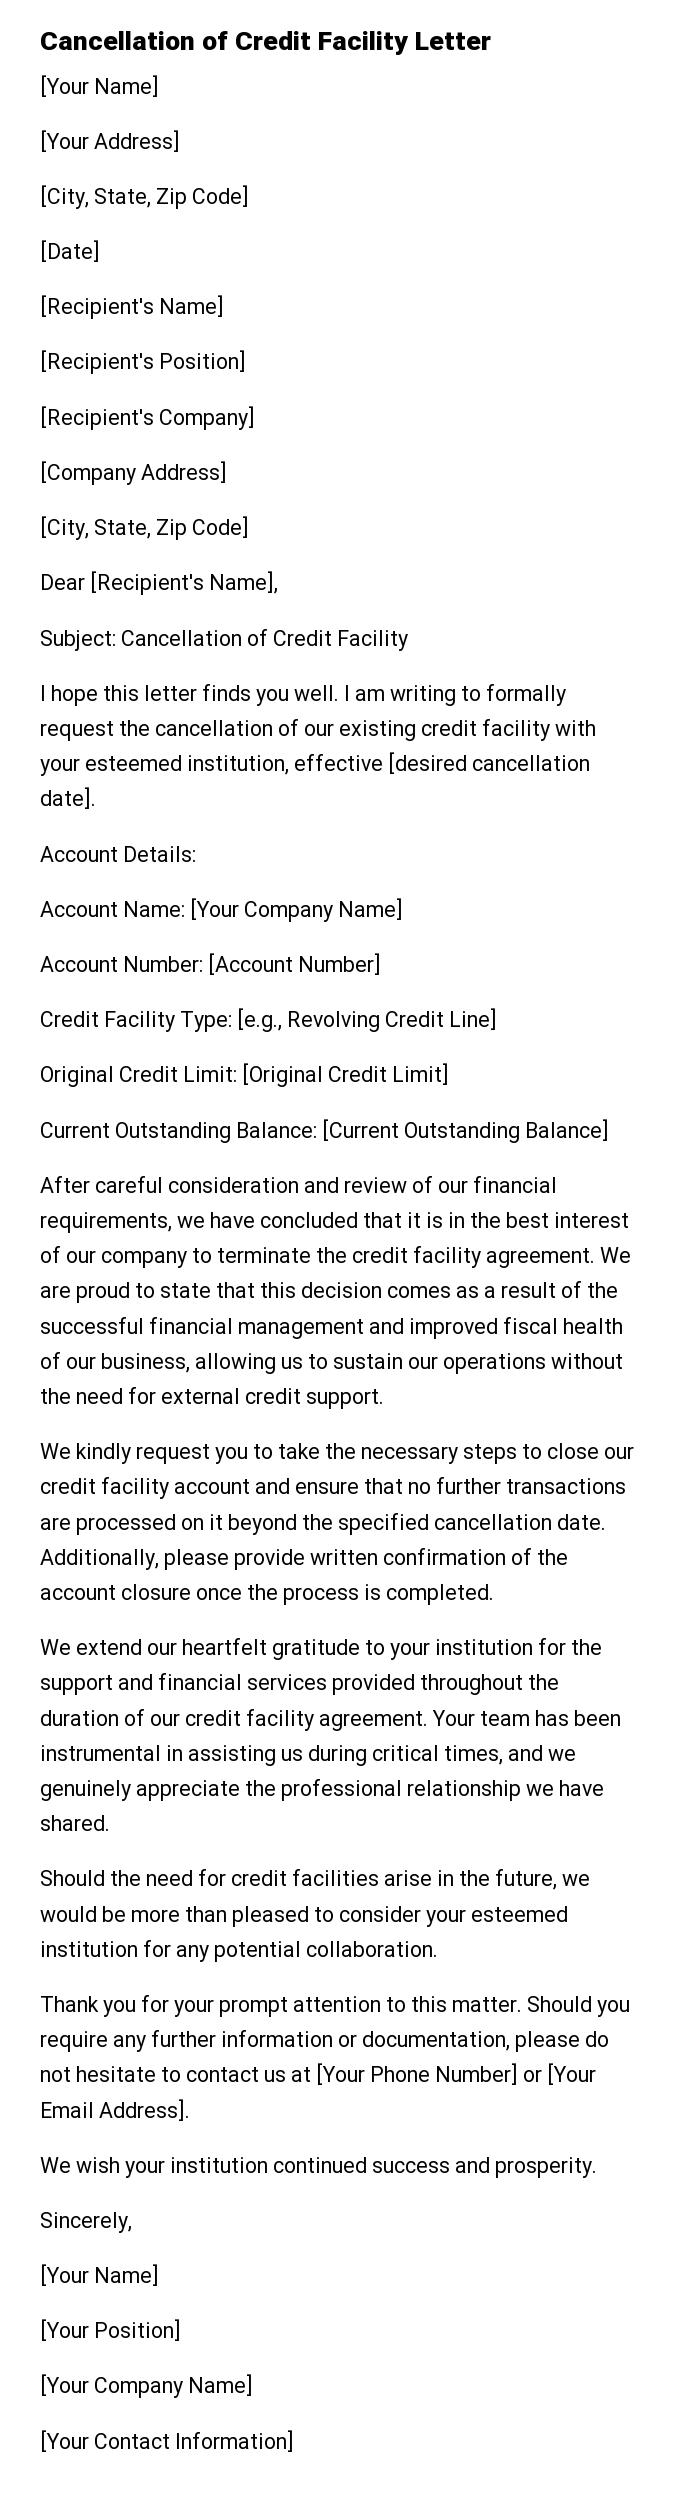 Cancellation of Credit Facility Letter